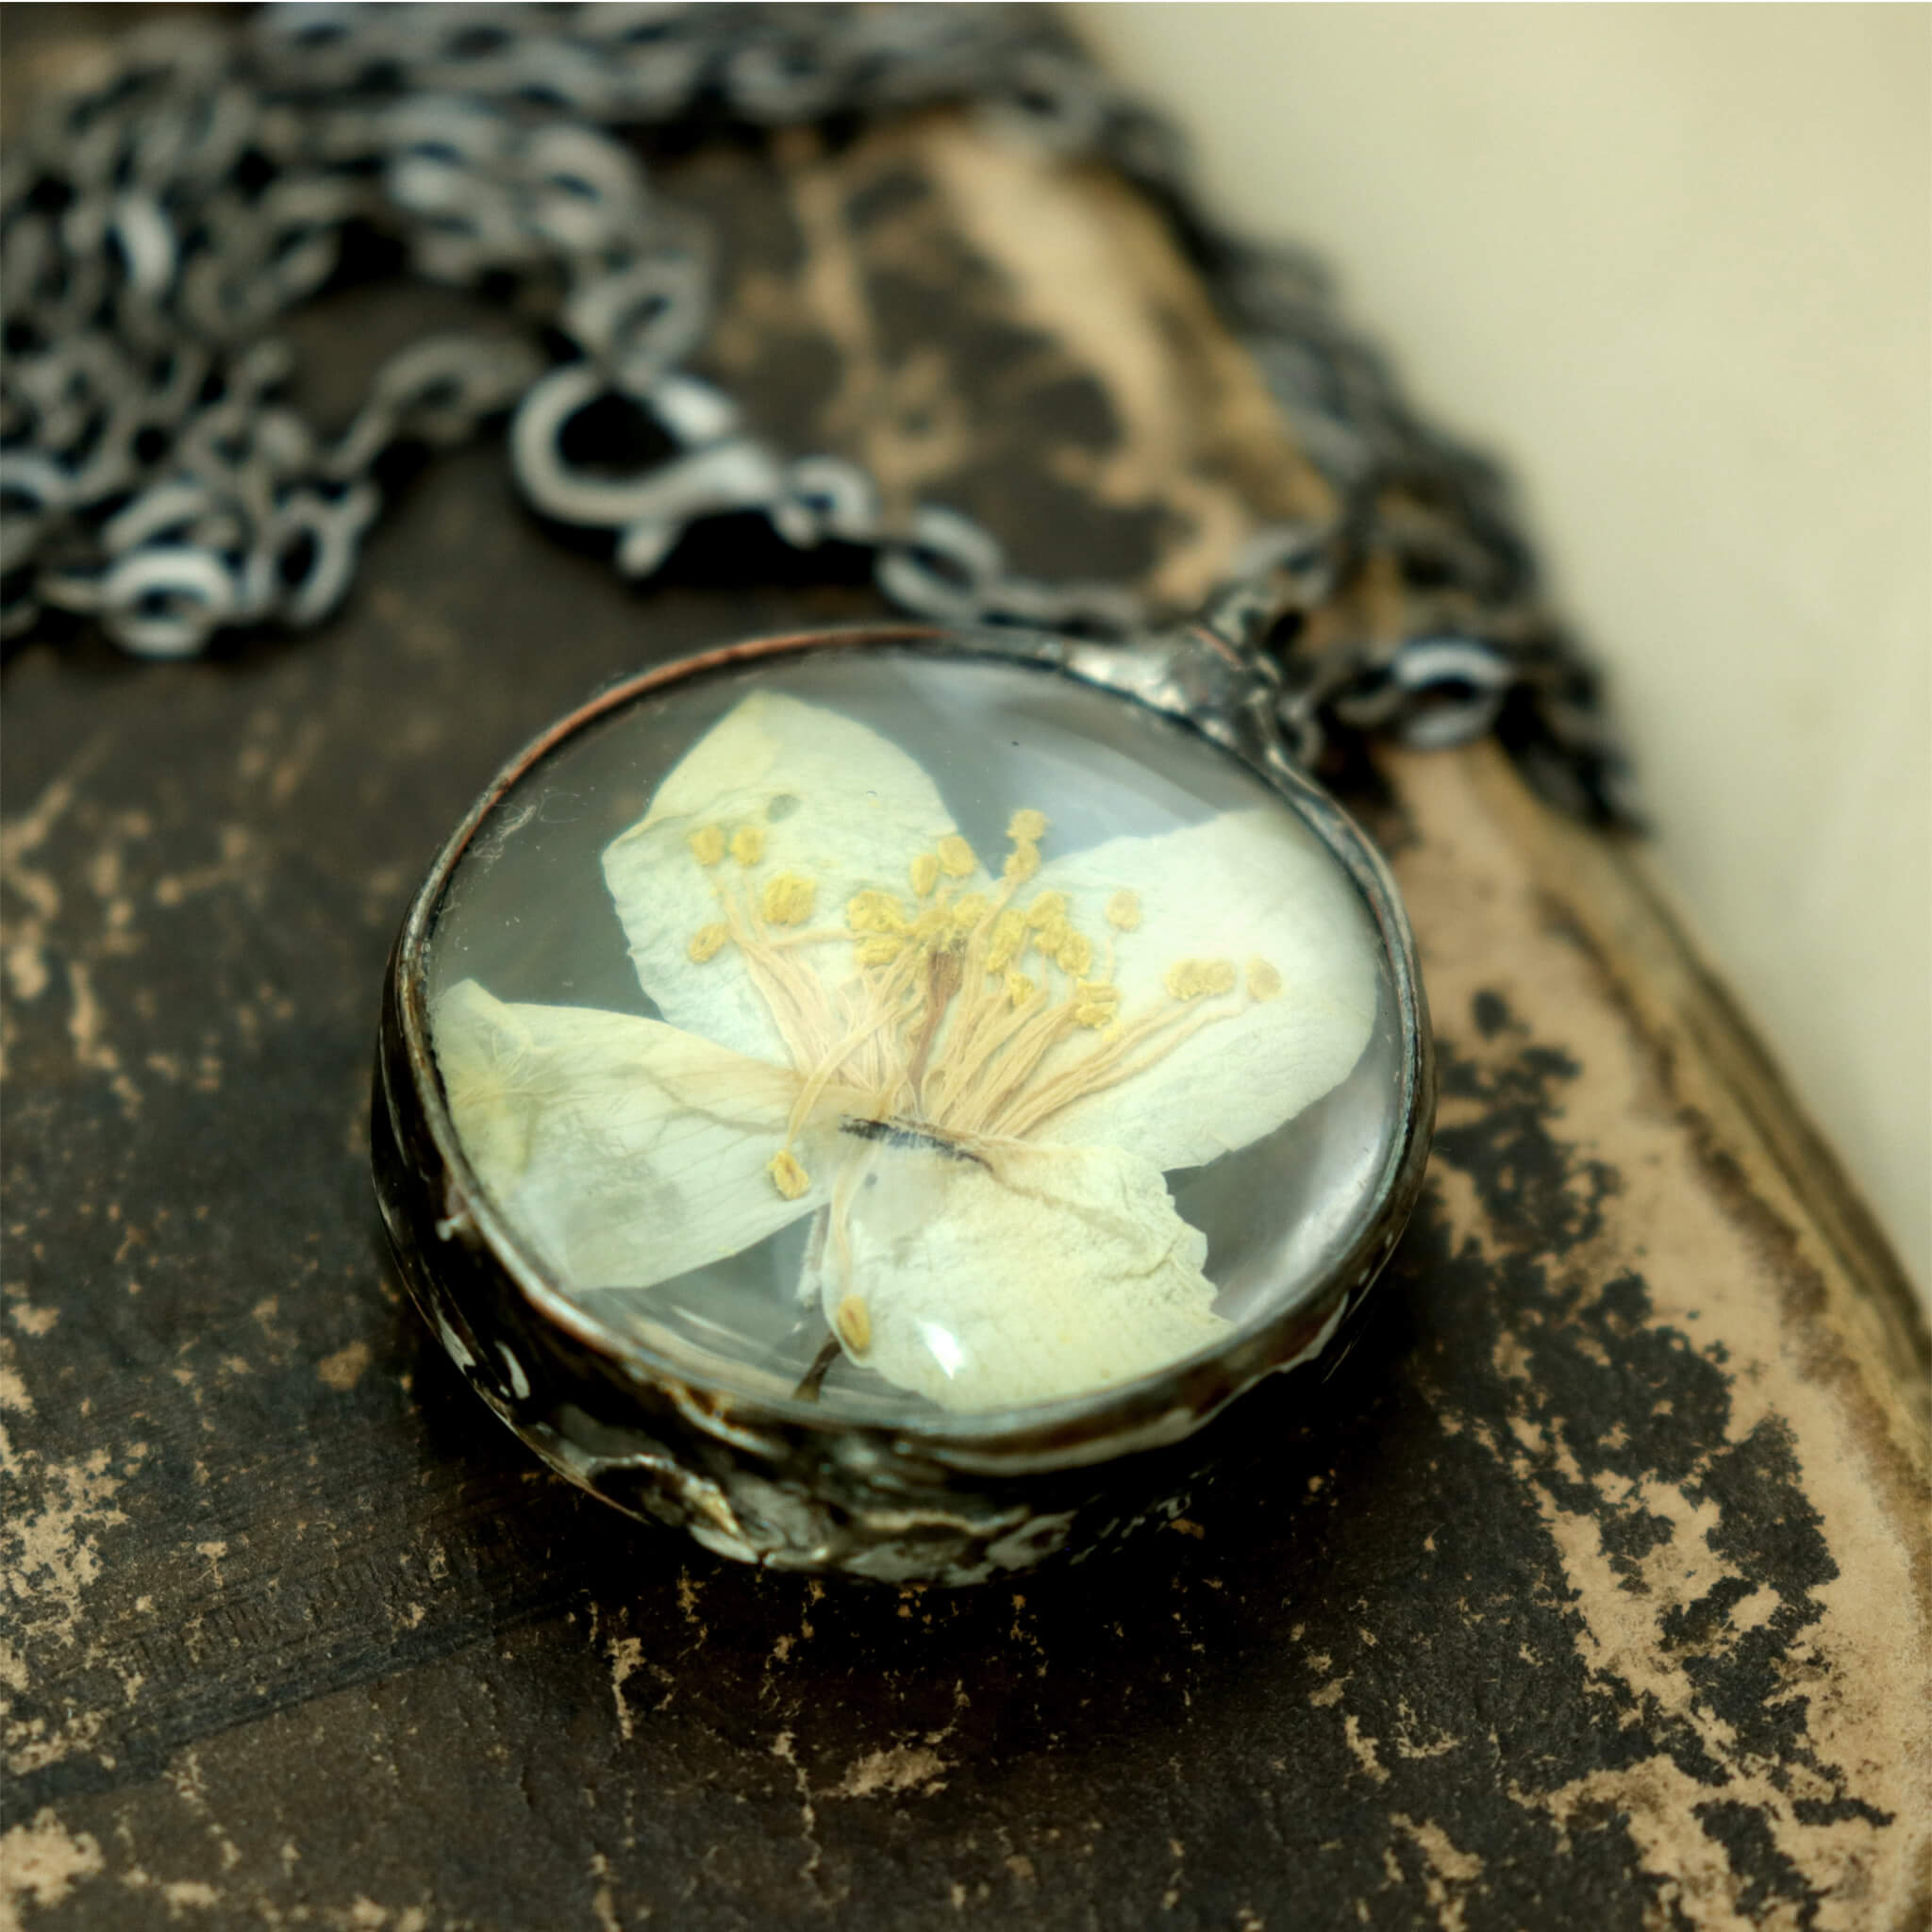 round jasmine necklace lying on a vintage brown covered and chipped book